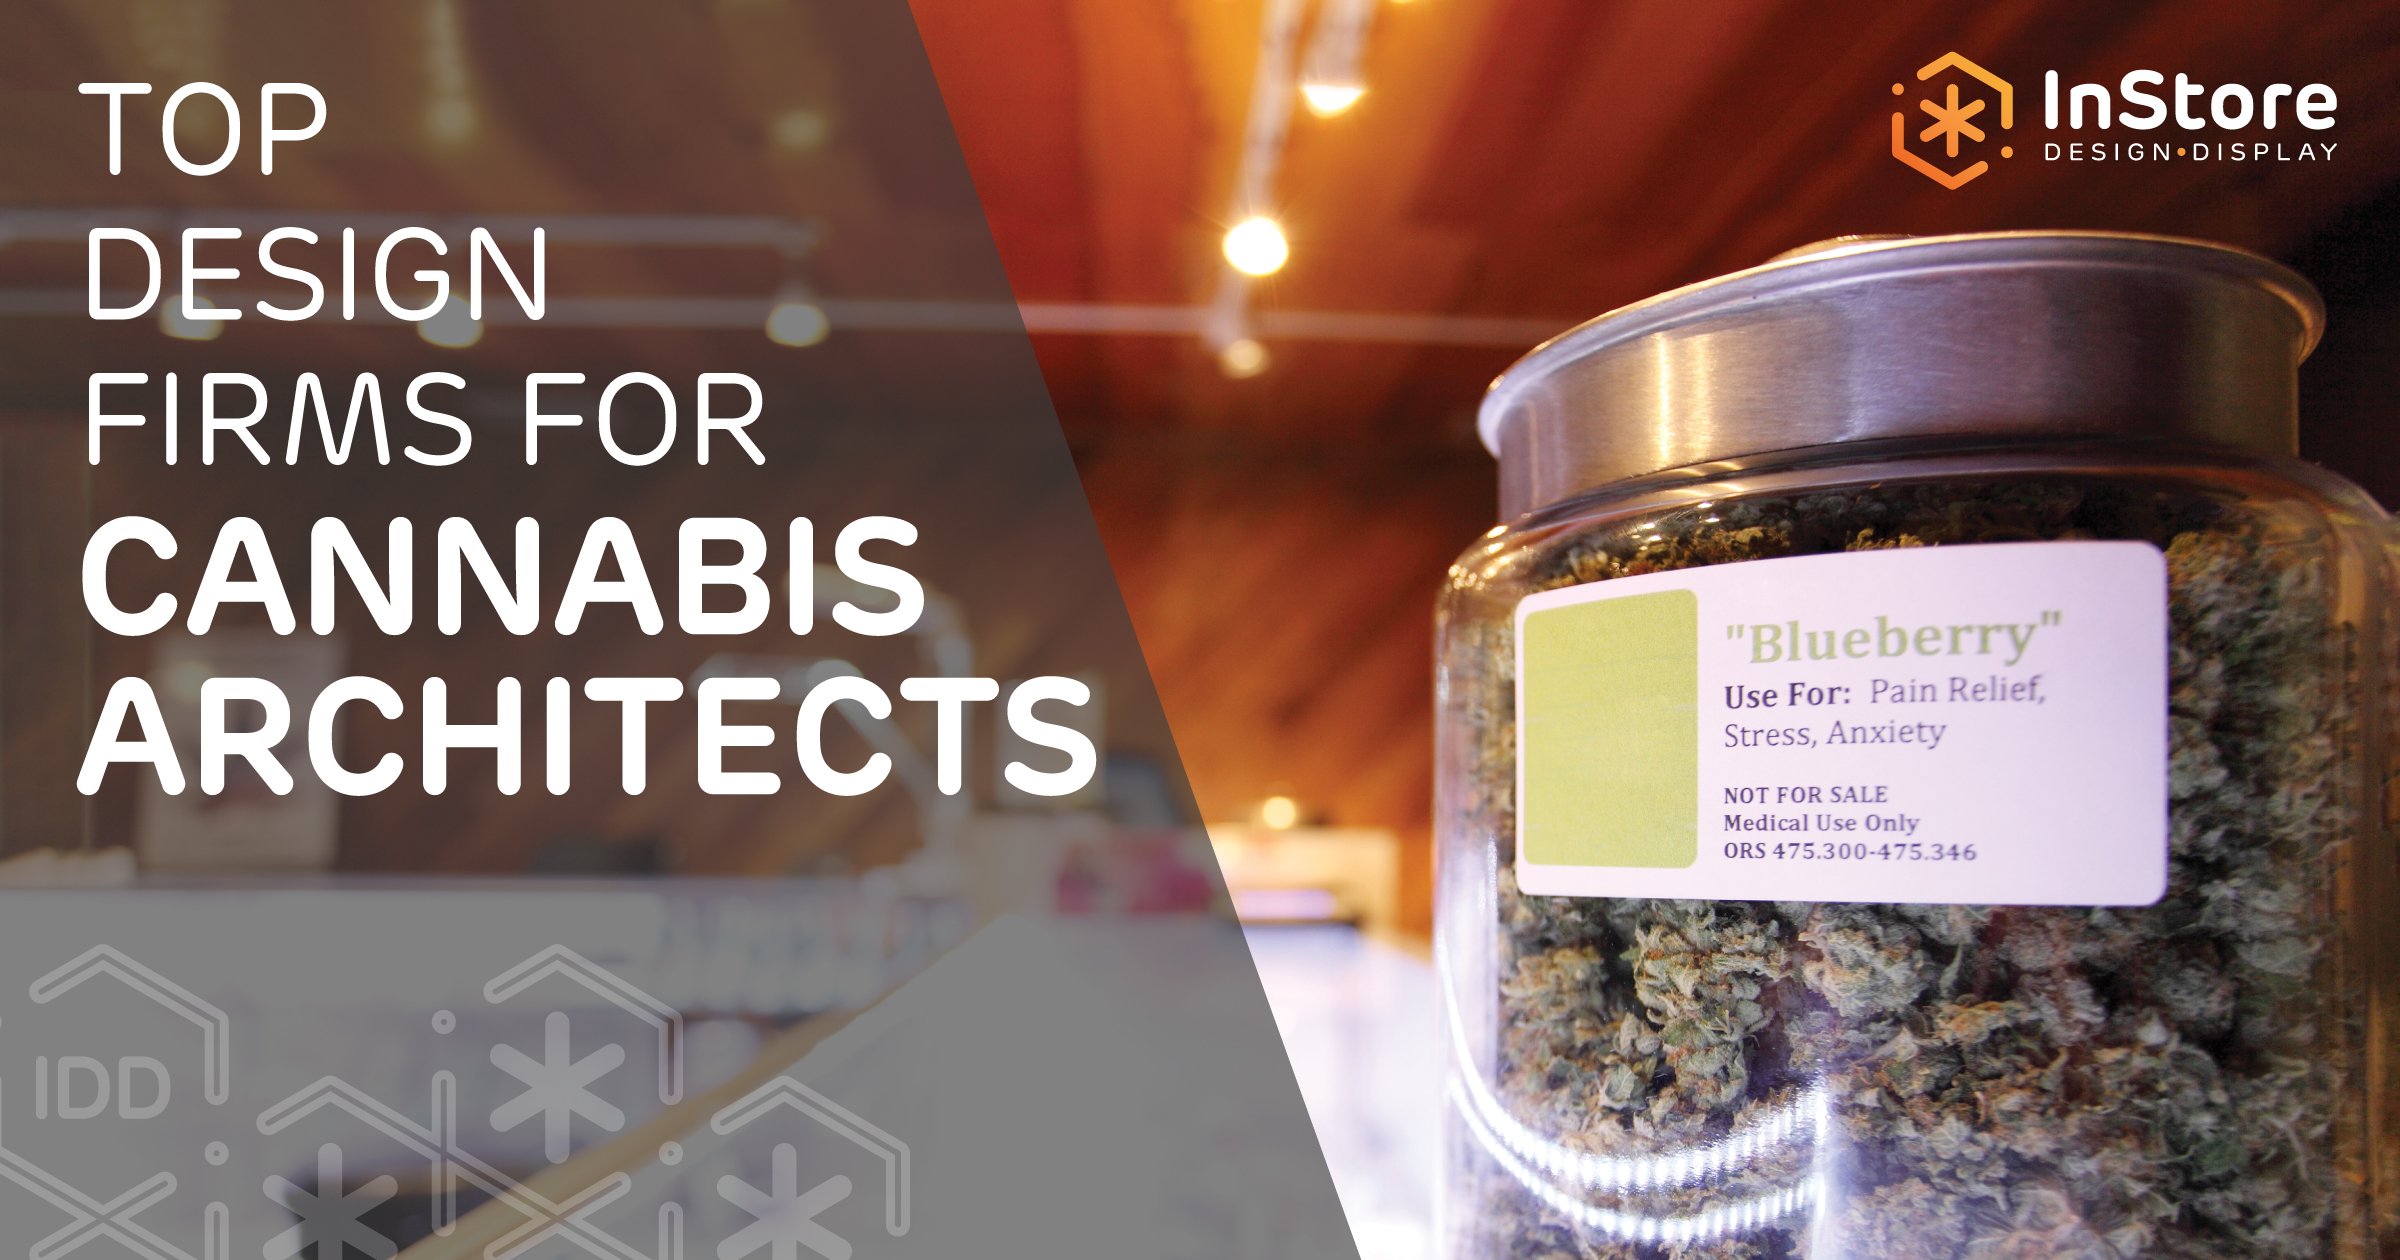 Top 5 Cannabis Architectural Design Firms in the U.S.